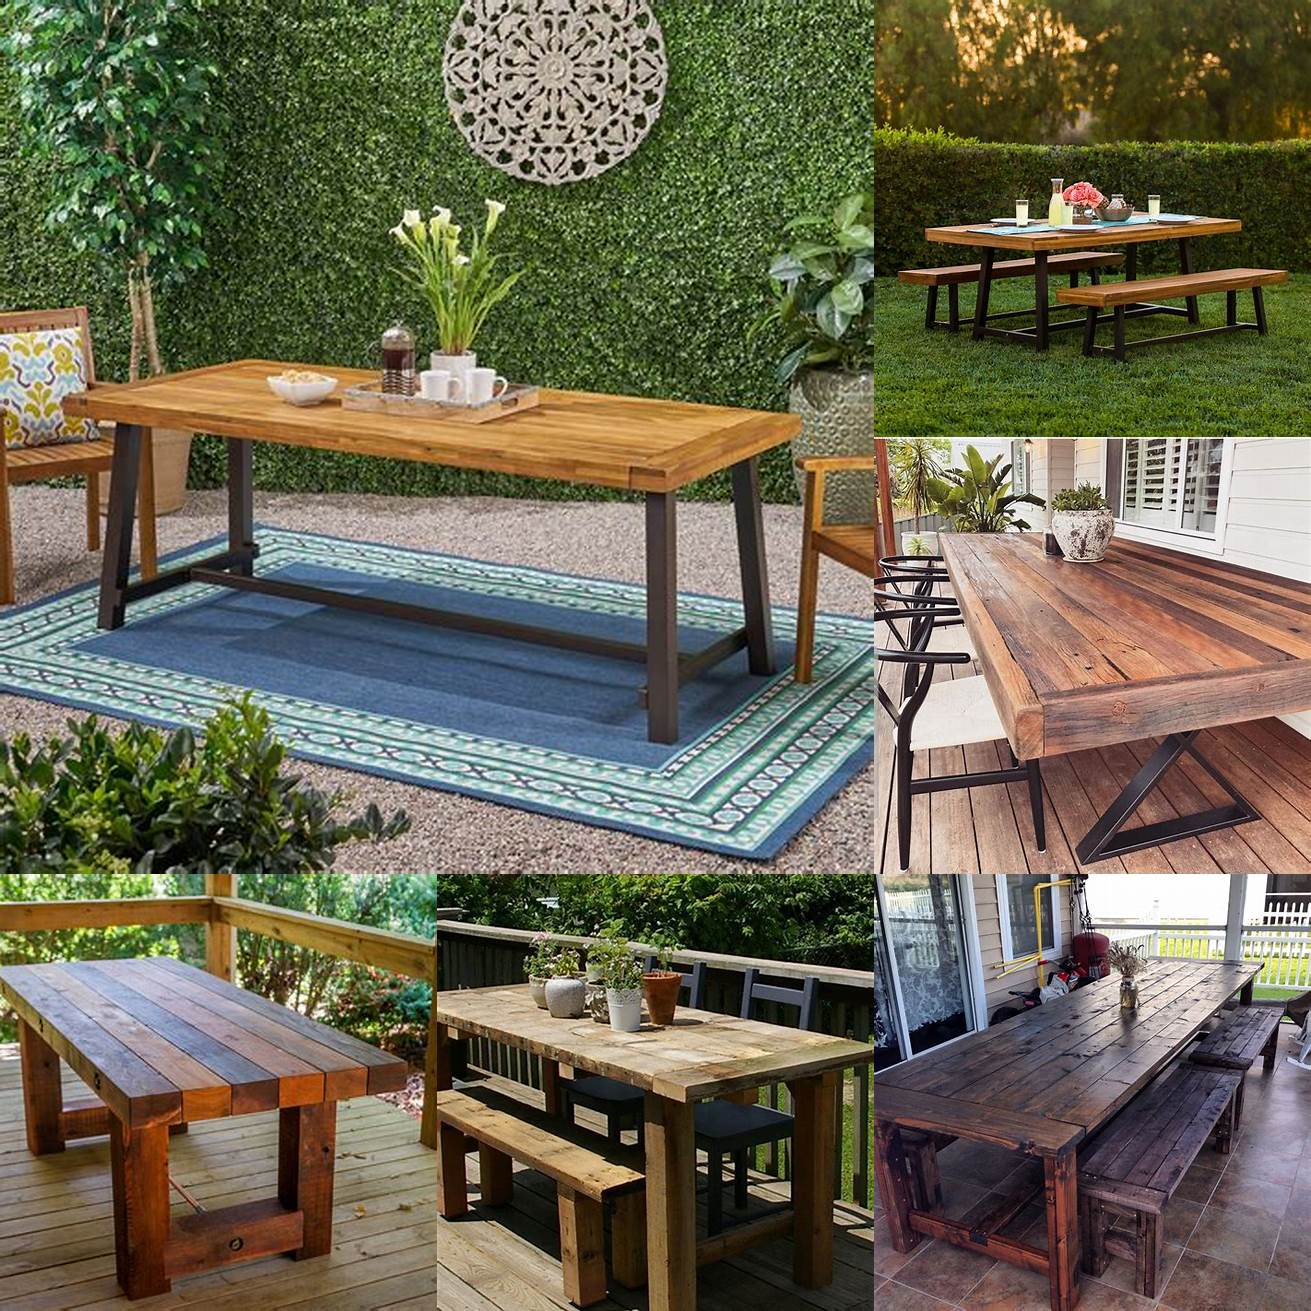 Rustic Outdoor Table